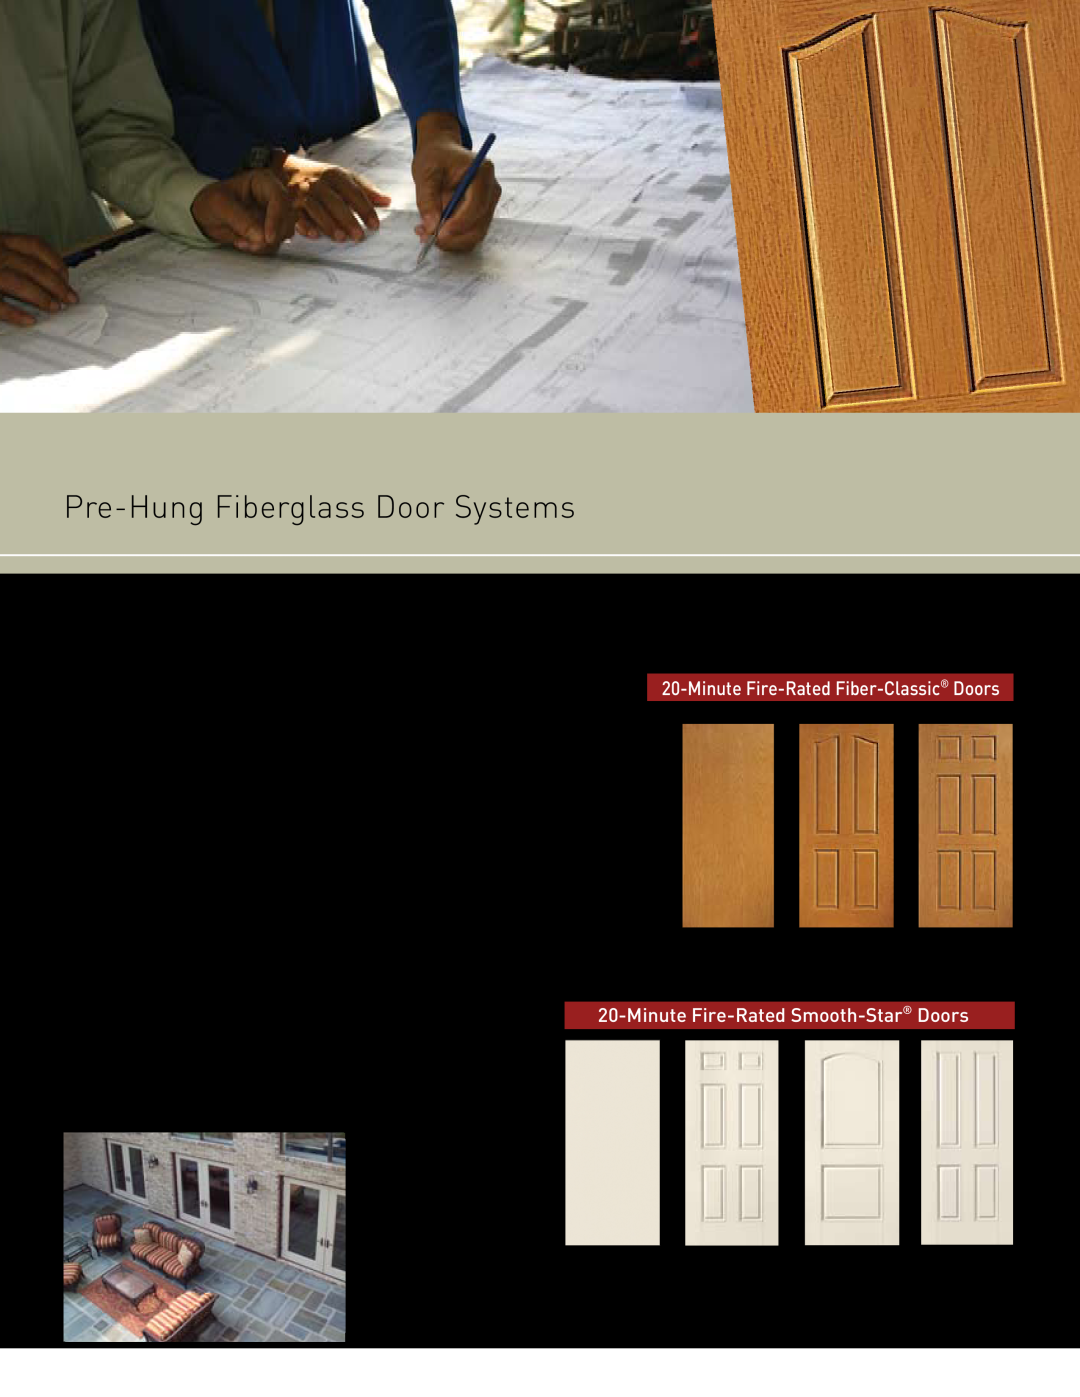 Therma-Tru Light Commercial Pre-Hung, Multi-Family Pre-Hung manual Pre-HungFiberglass Door Systems, Minute Fiber-Classic and 